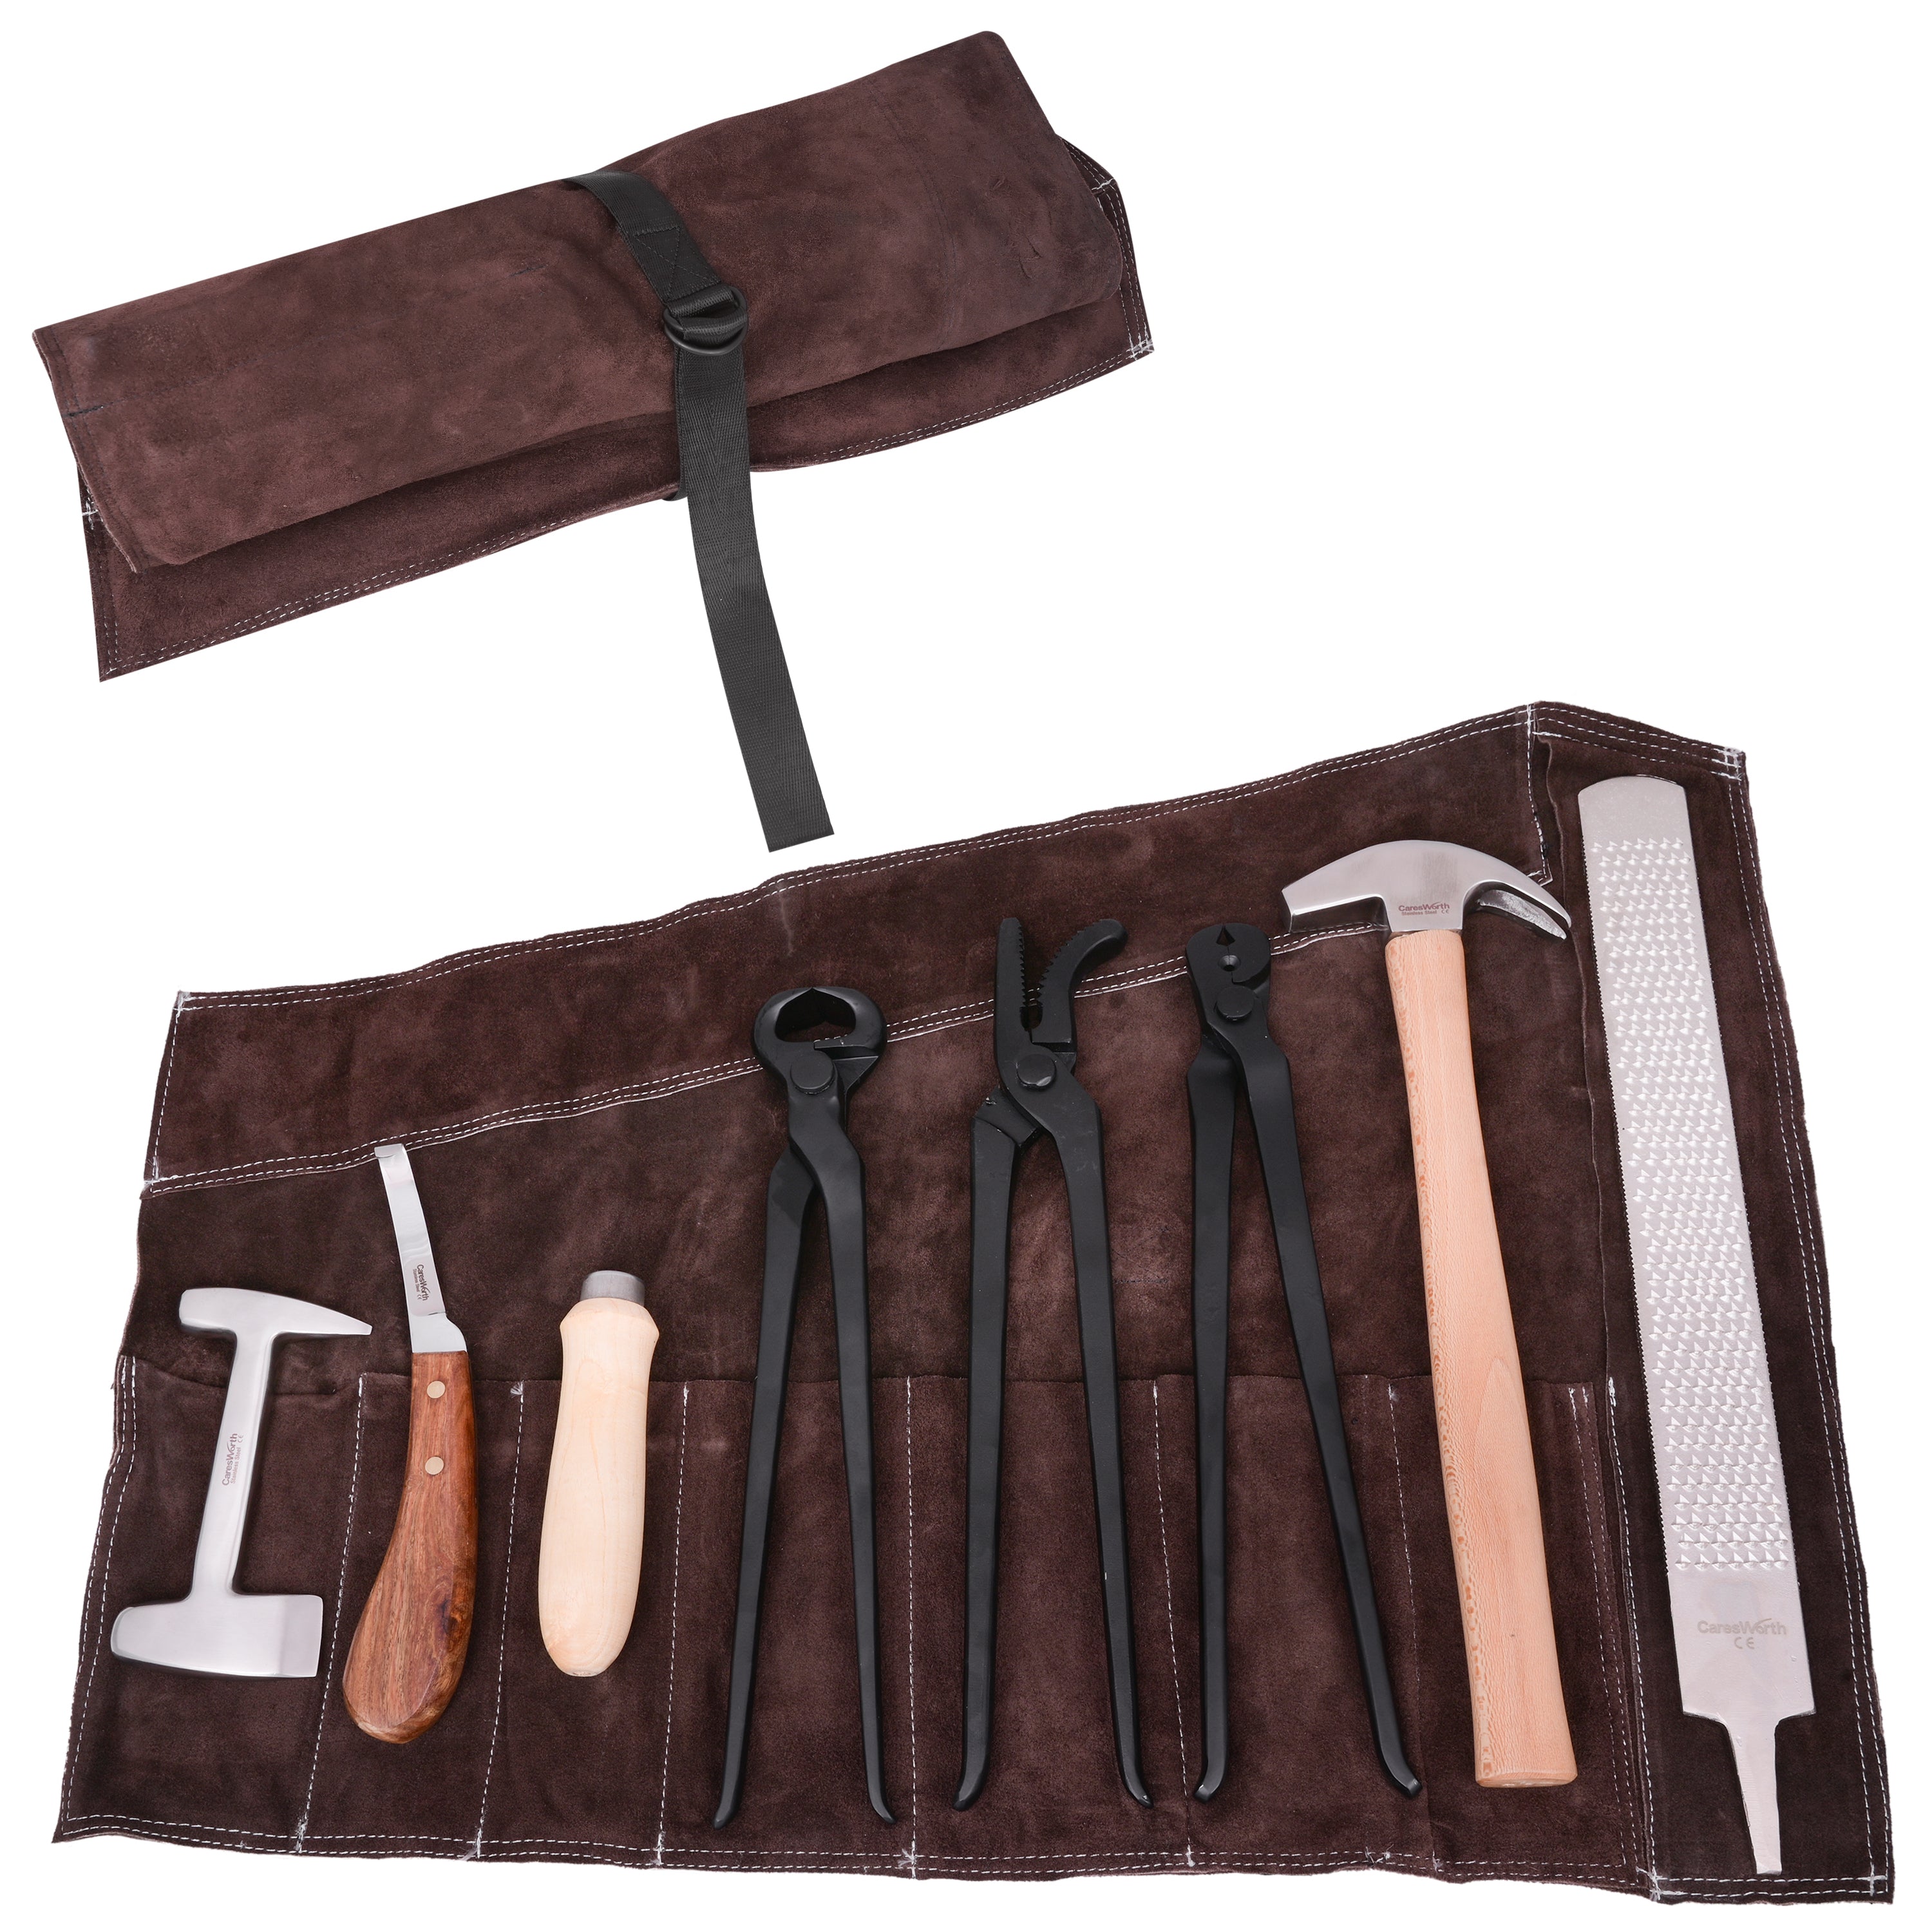 7Pcs Professional Farrier Tools Kit with Leather Roll Pack, Farrier Rasp File, Farrier Hammer, Horse Crease Nail Pullers, Hoof Nipper, Farrier Clincher, Hoof Knife J2 Steel, Horse Clinch Cutter